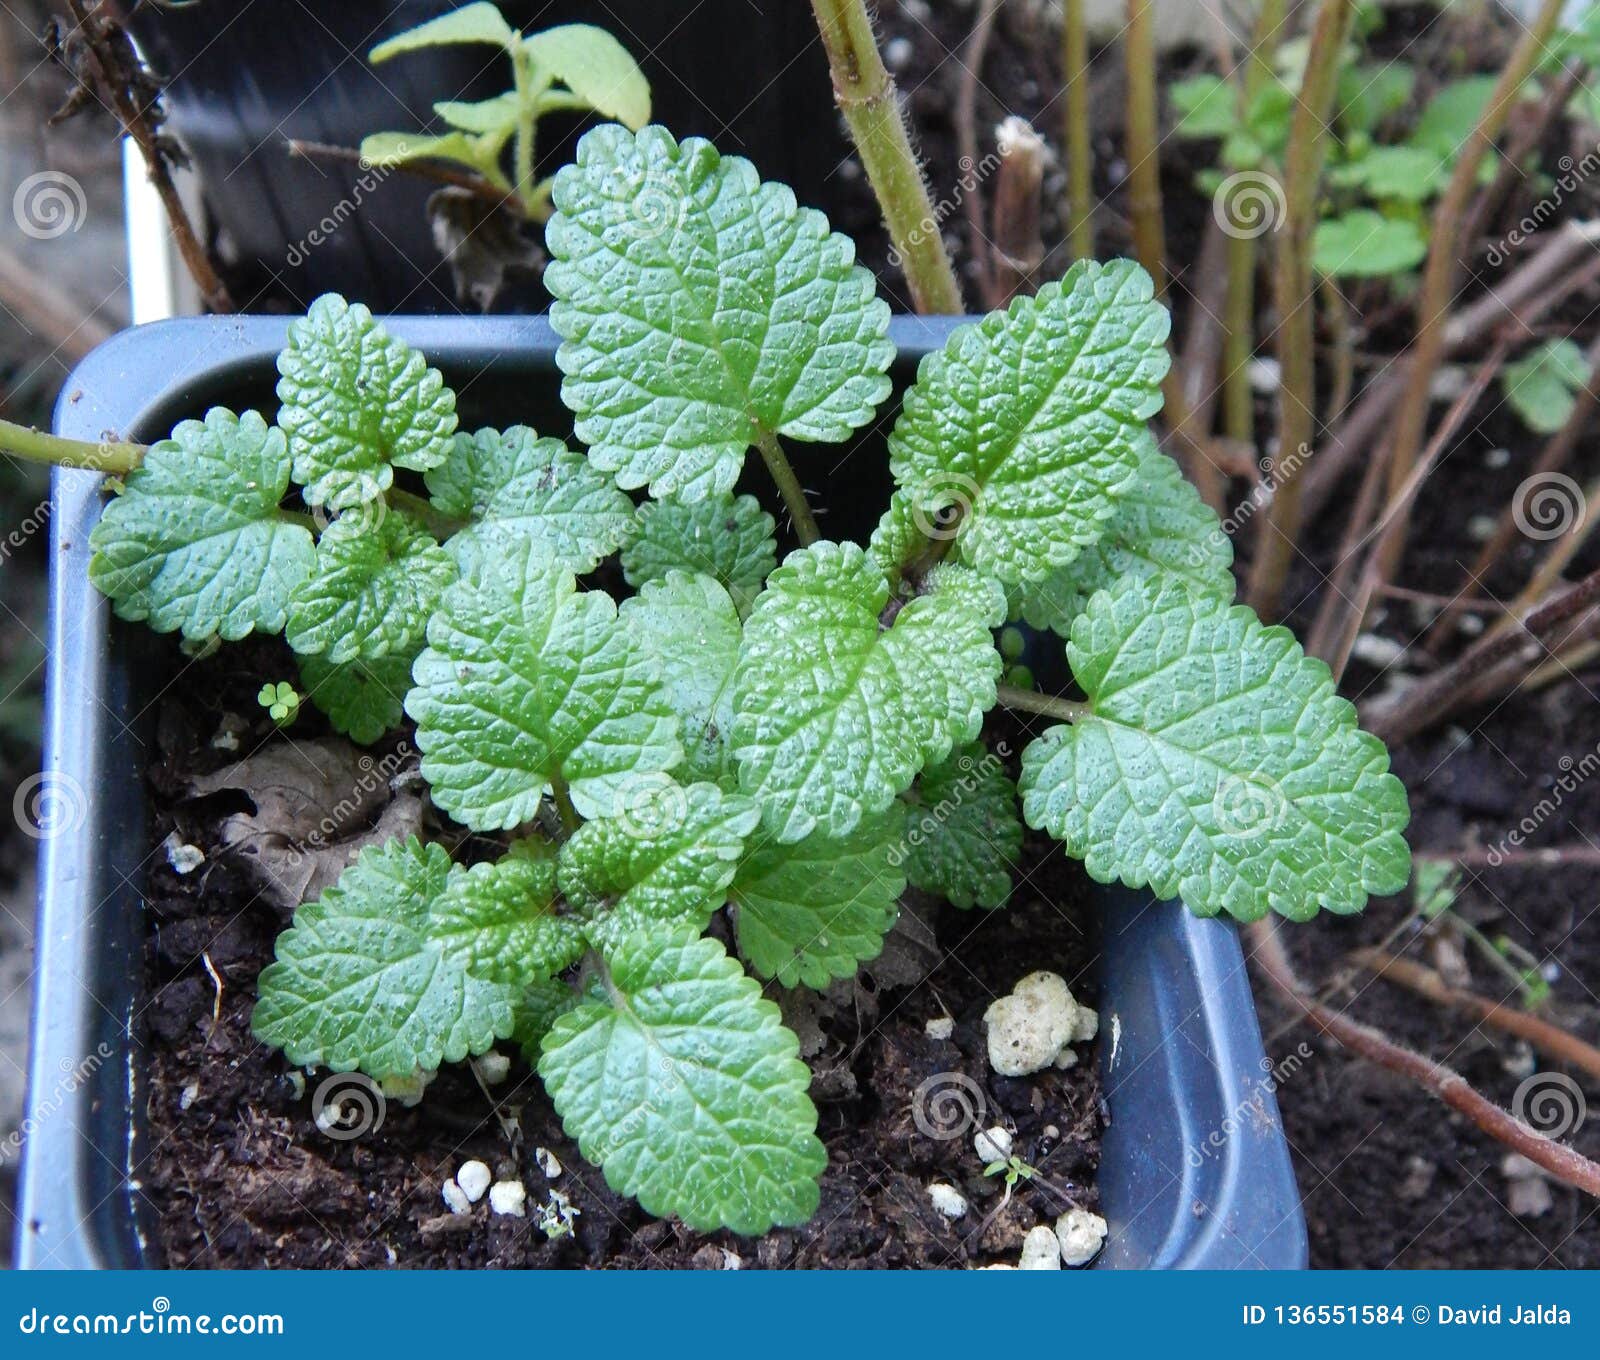 peppermint mentha plant in a pot